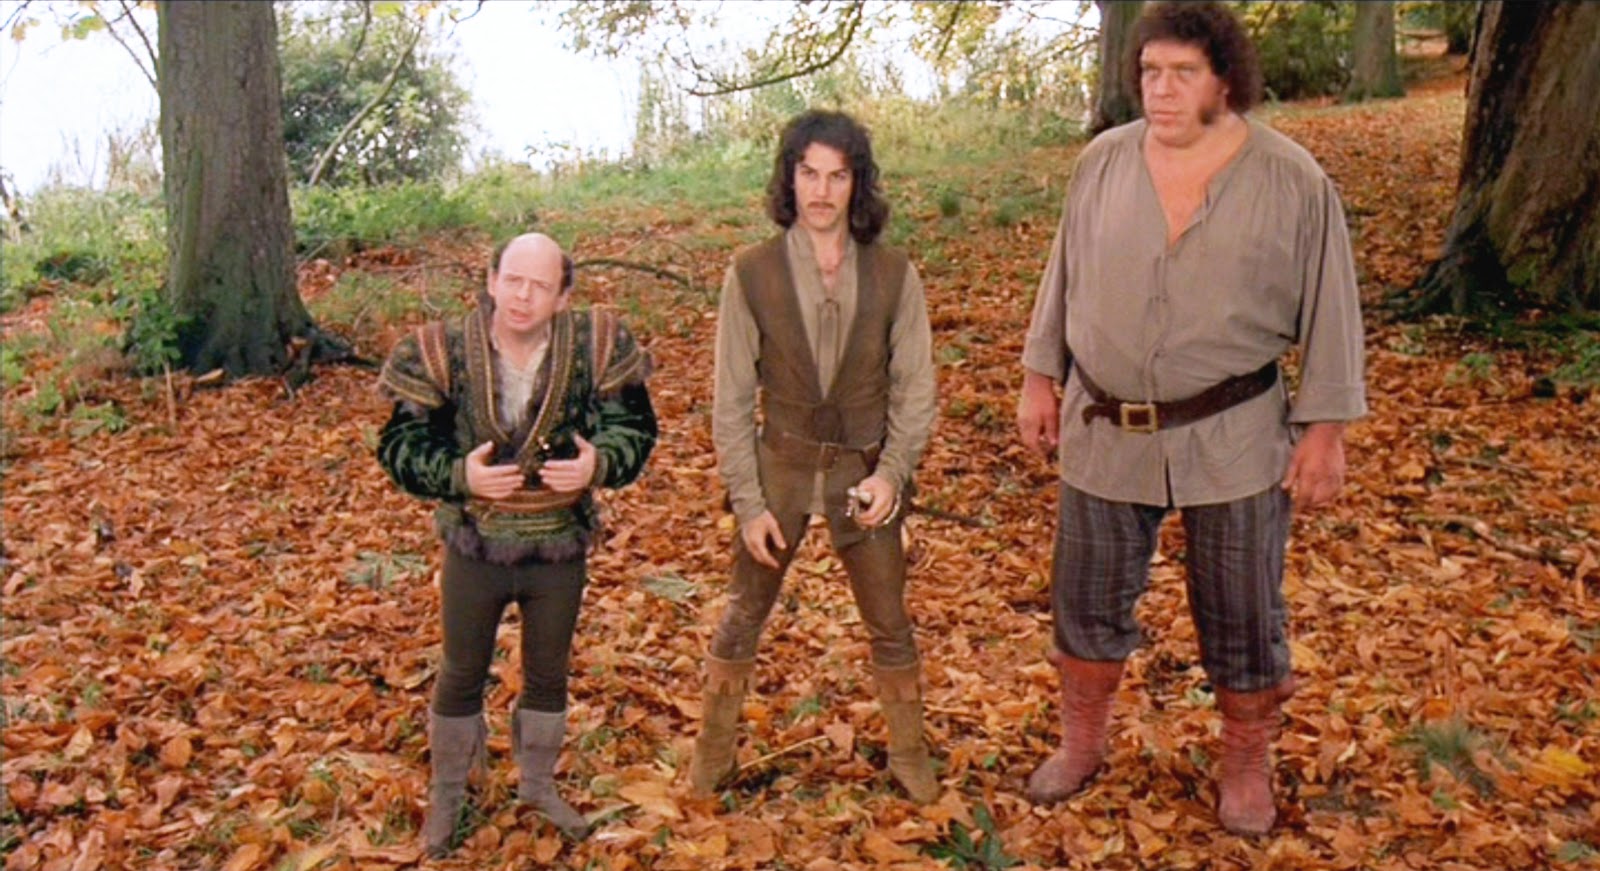 FROM THE ARCHIVES: Andre the Giant talks Princess Bride, Hulk ...